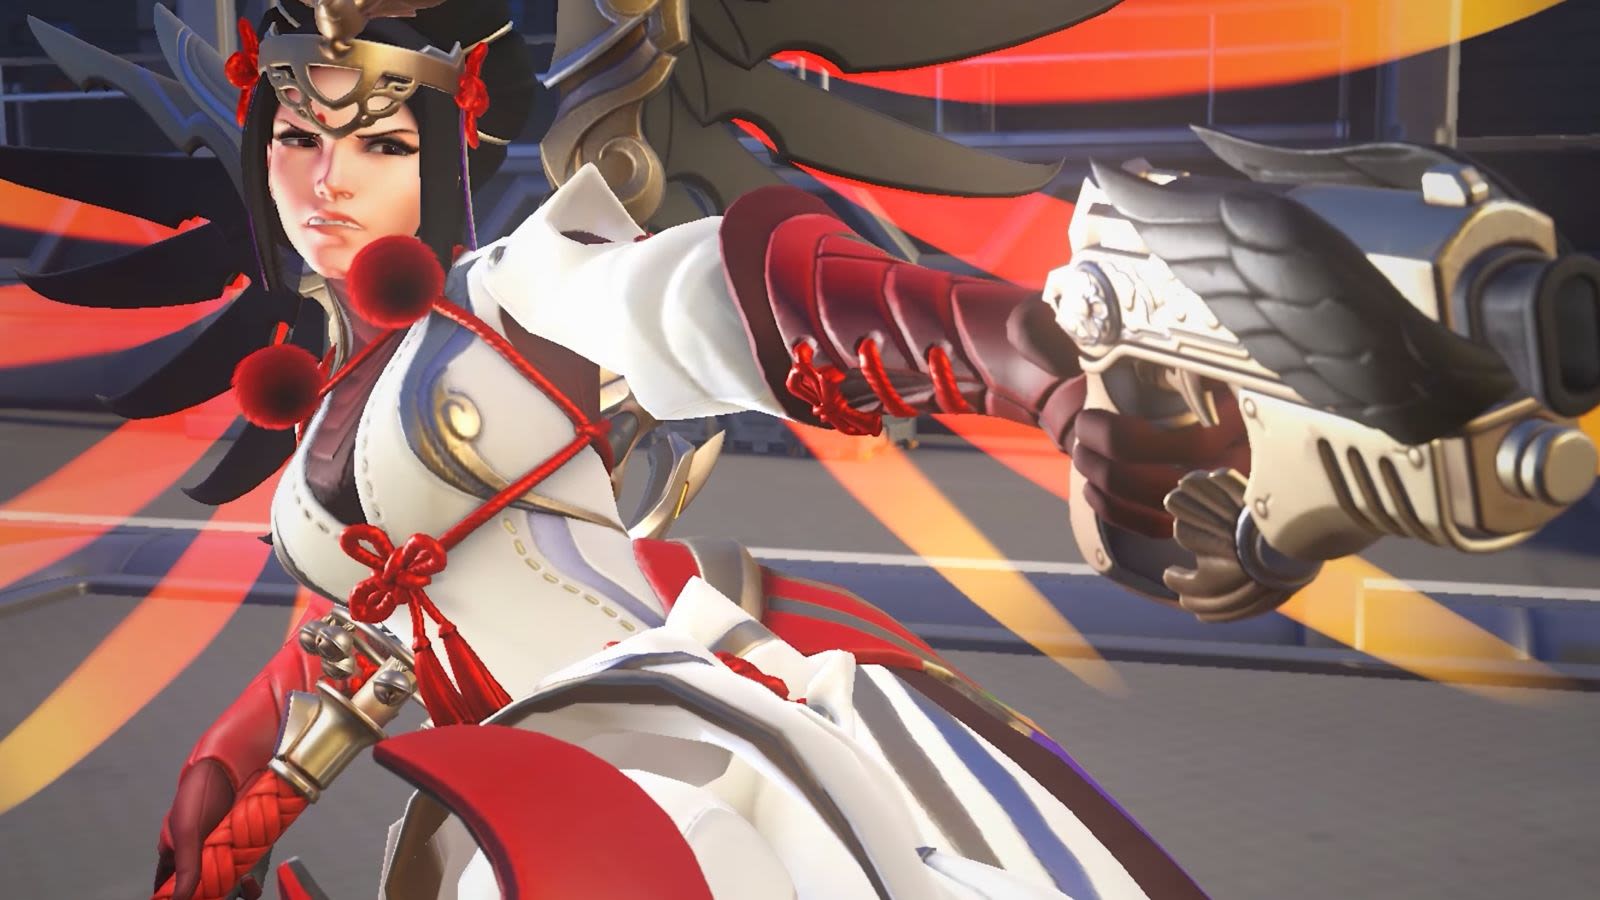 Overwatch 2 devs reveal plans to buff Mercy with a “most-requested” change - Dexerto